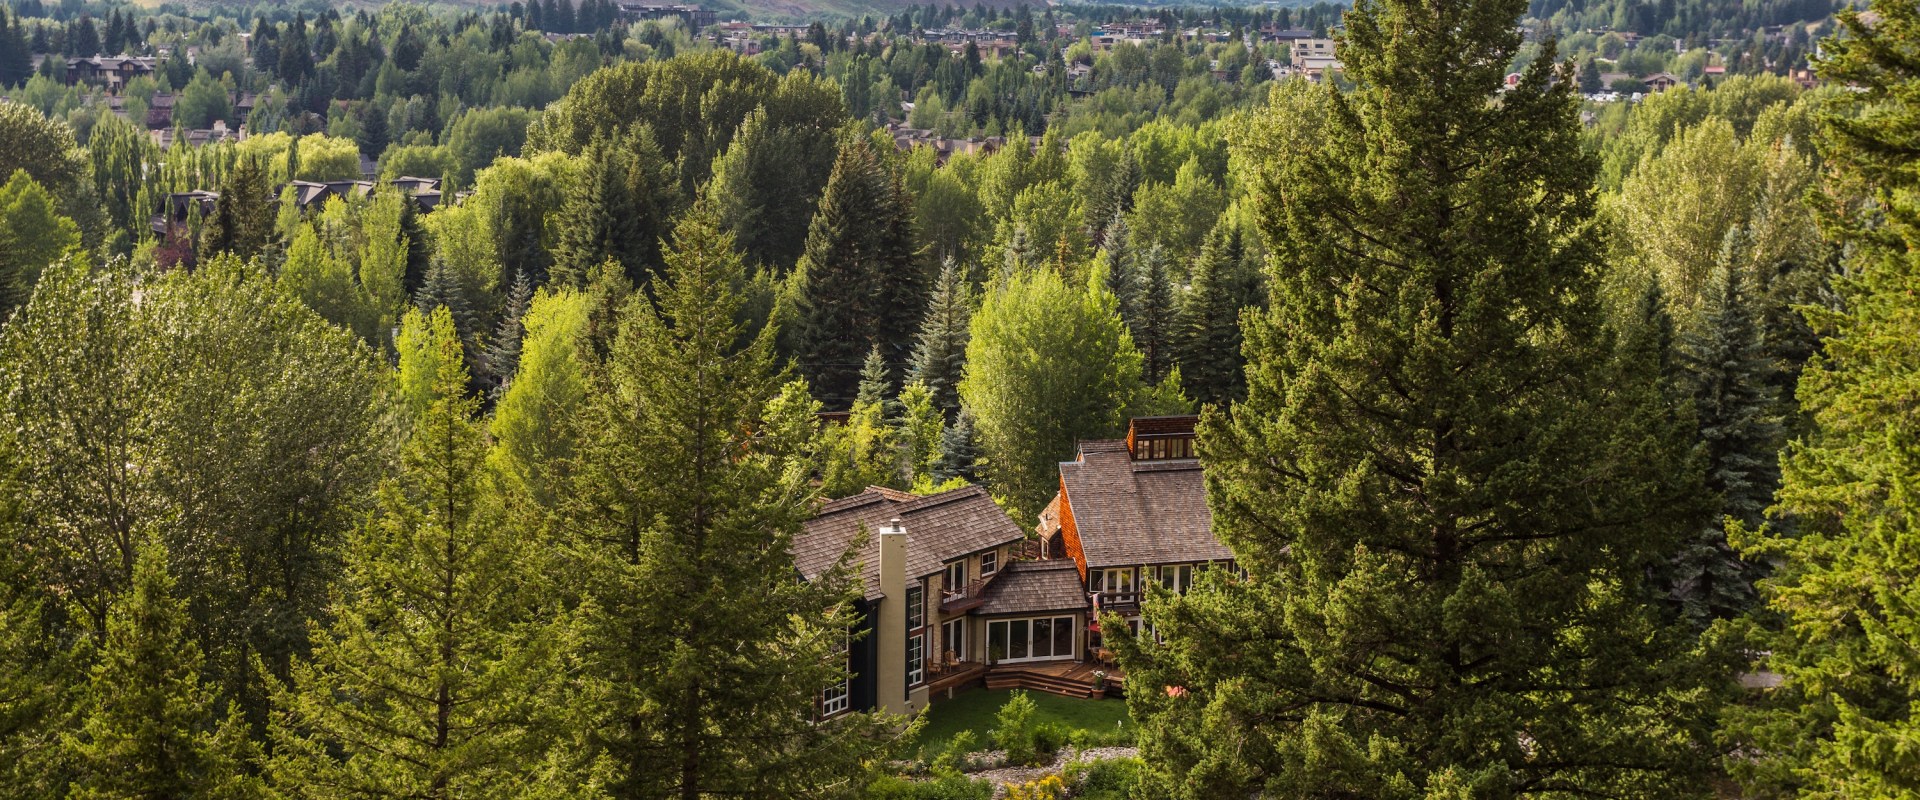 Idaho Home Values and Prices: A Real Estate Market Overview